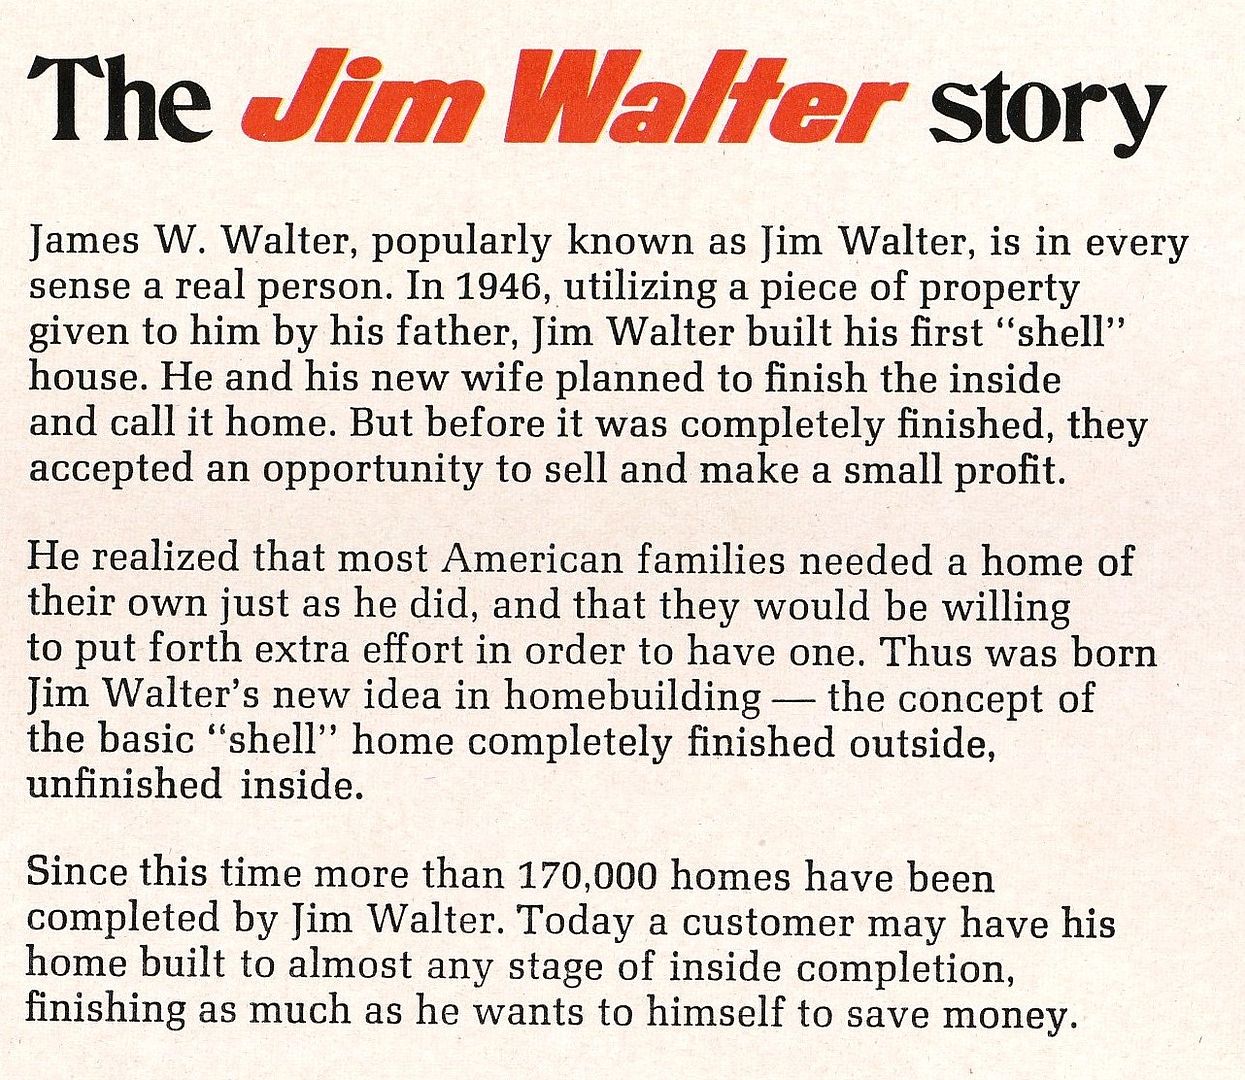 The Jim Walter Story, as told by corporate copy writers. 